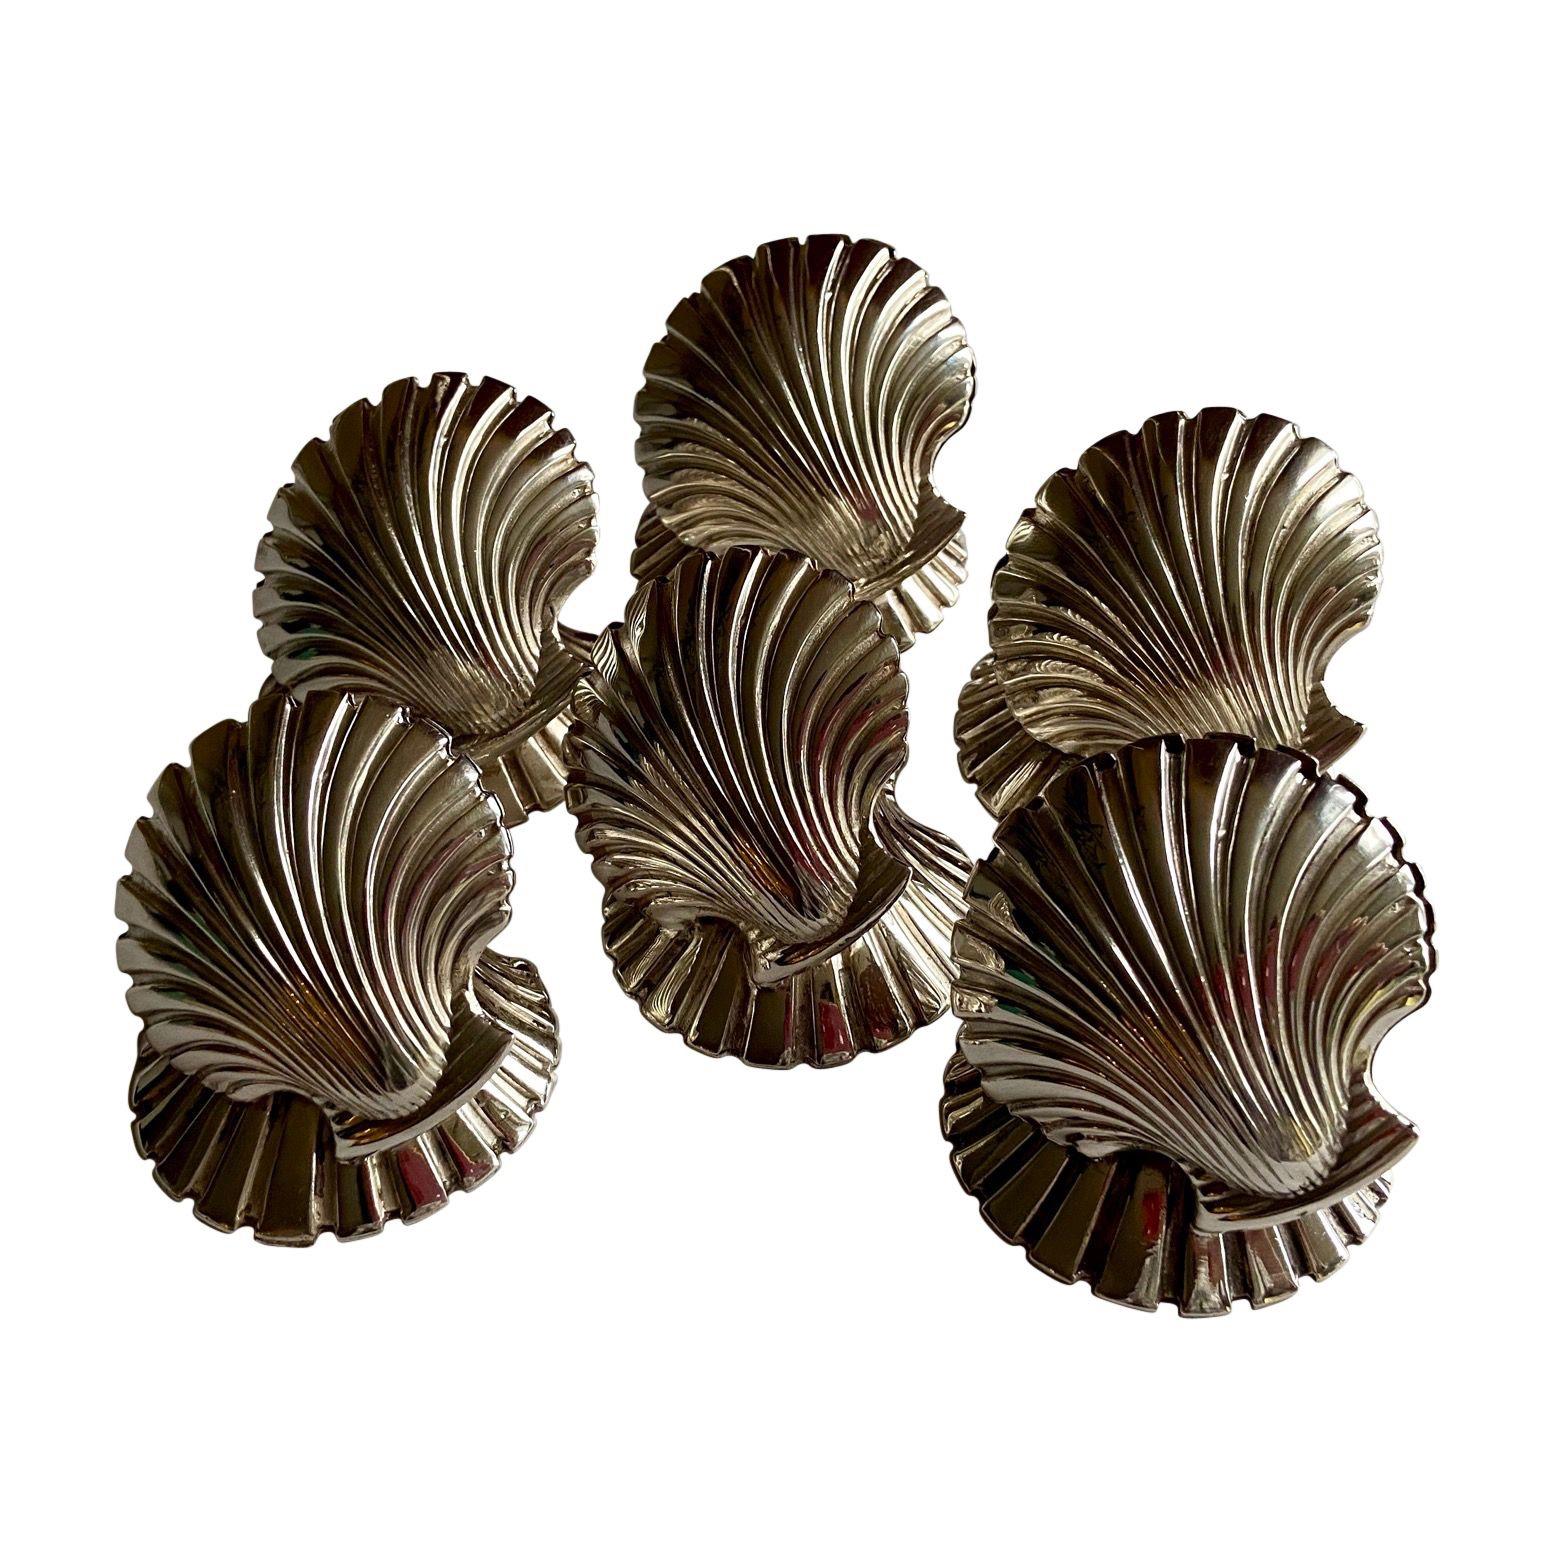 Italian 6 Vintage 1940s-1950s Silver Plated Shells, Place Card Holders, Fratelli Broggi For Sale